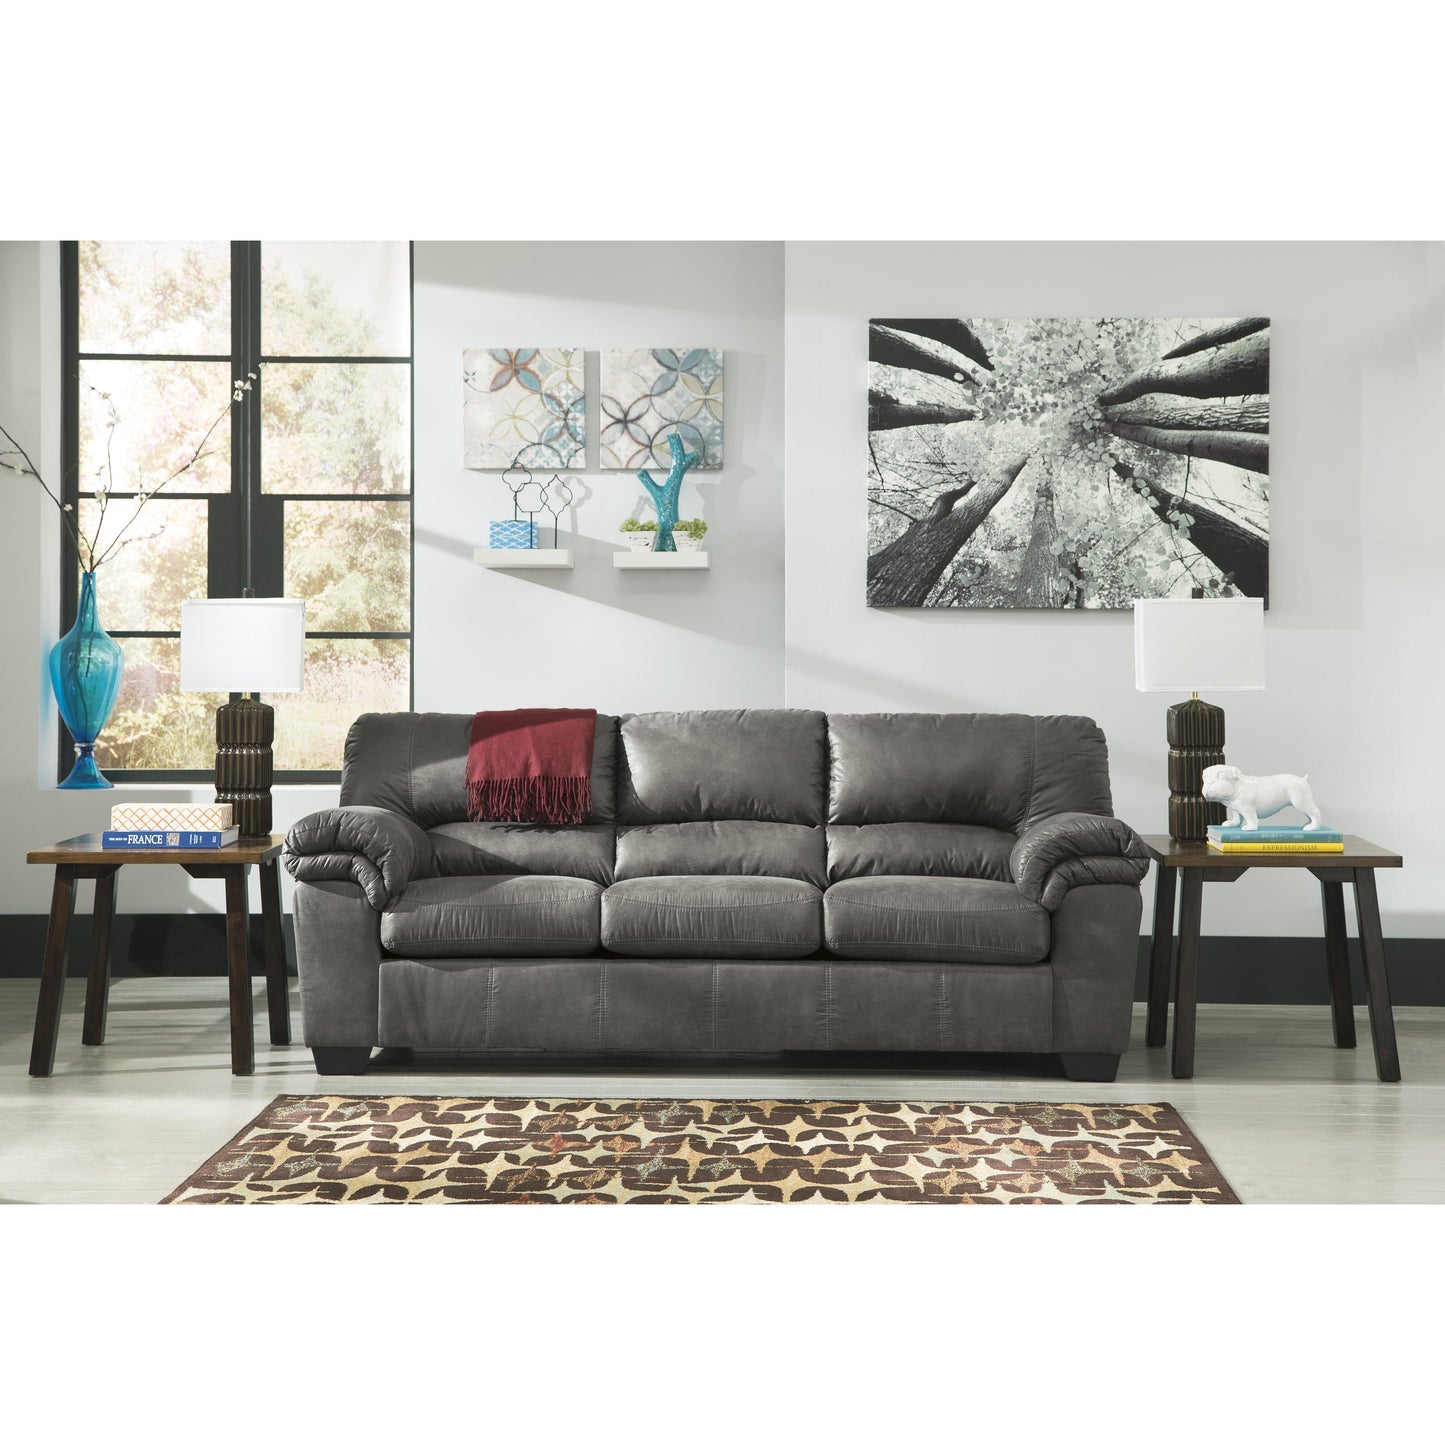 Signature Design by Ashley Bladen Stationary Leather Look Sofa 1202138